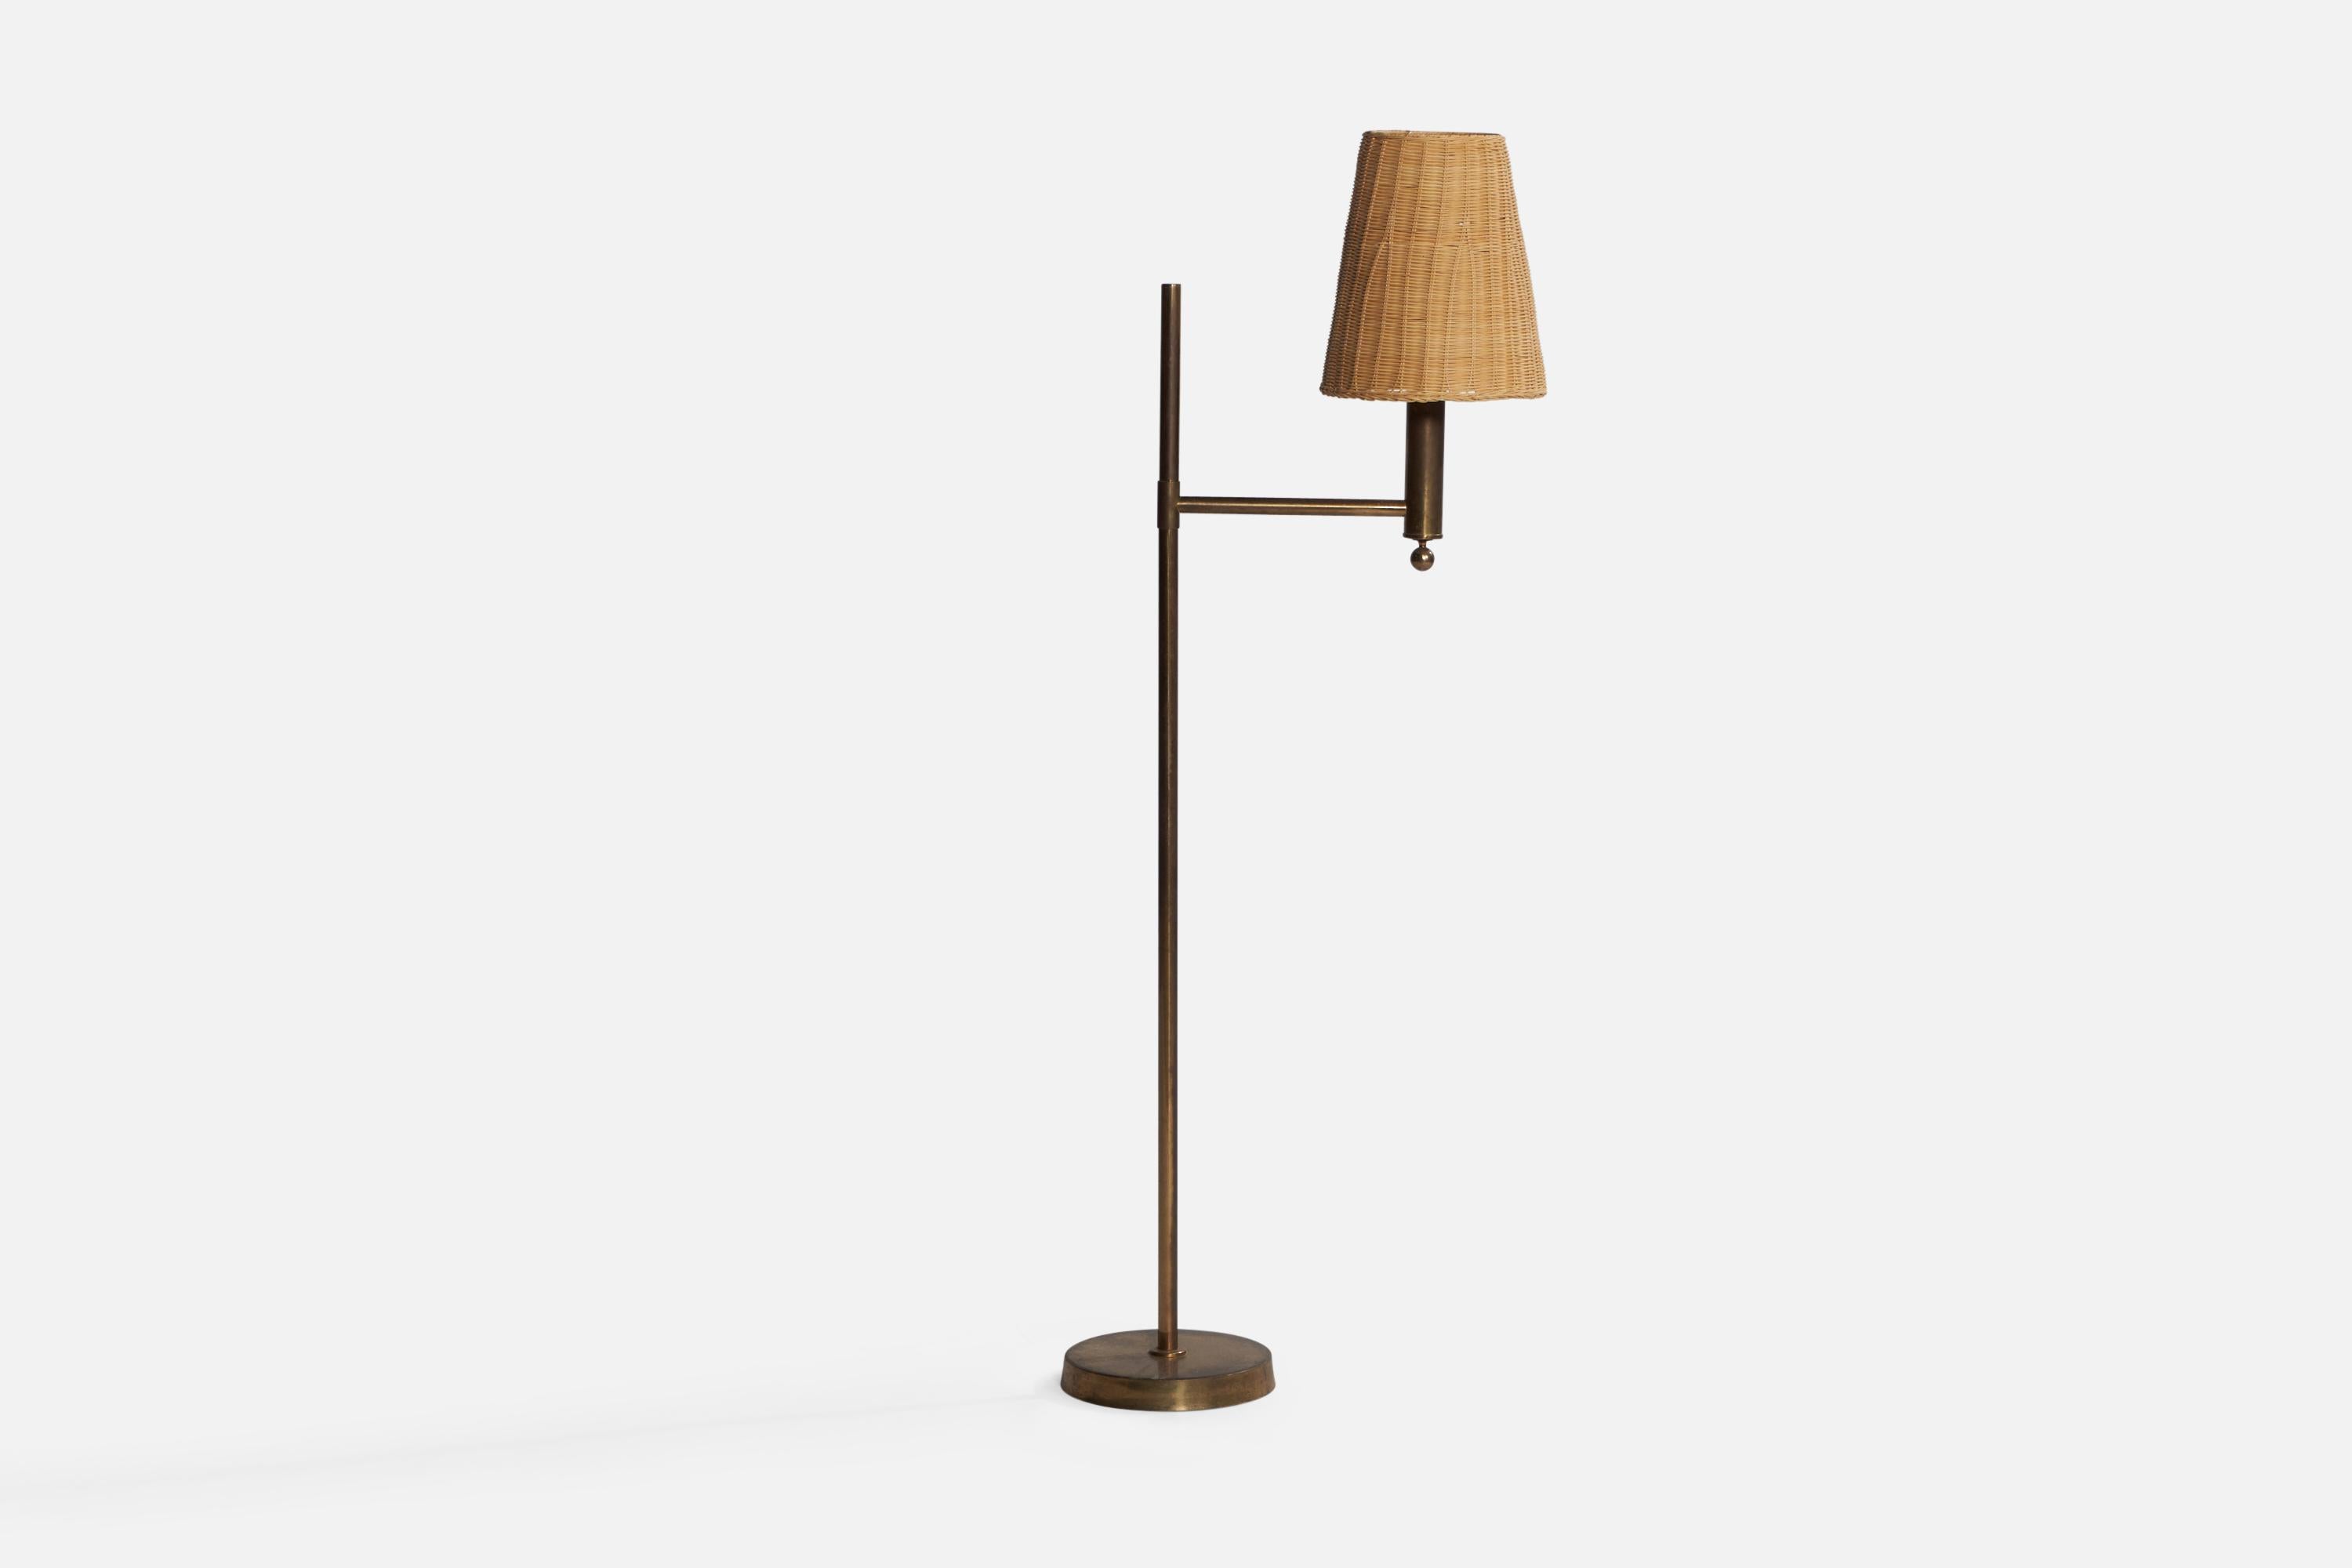 A brass and rattan floor lamp designed and produced by Bergboms, Sweden, c. 1960s.

Overall Dimensions (inches): 53.5” H x 9.45” W x 20.15” D. Stated dimensions include shade.
Bulb Specifications: E-26 Bulb
Number of Sockets: 1
All lighting will be